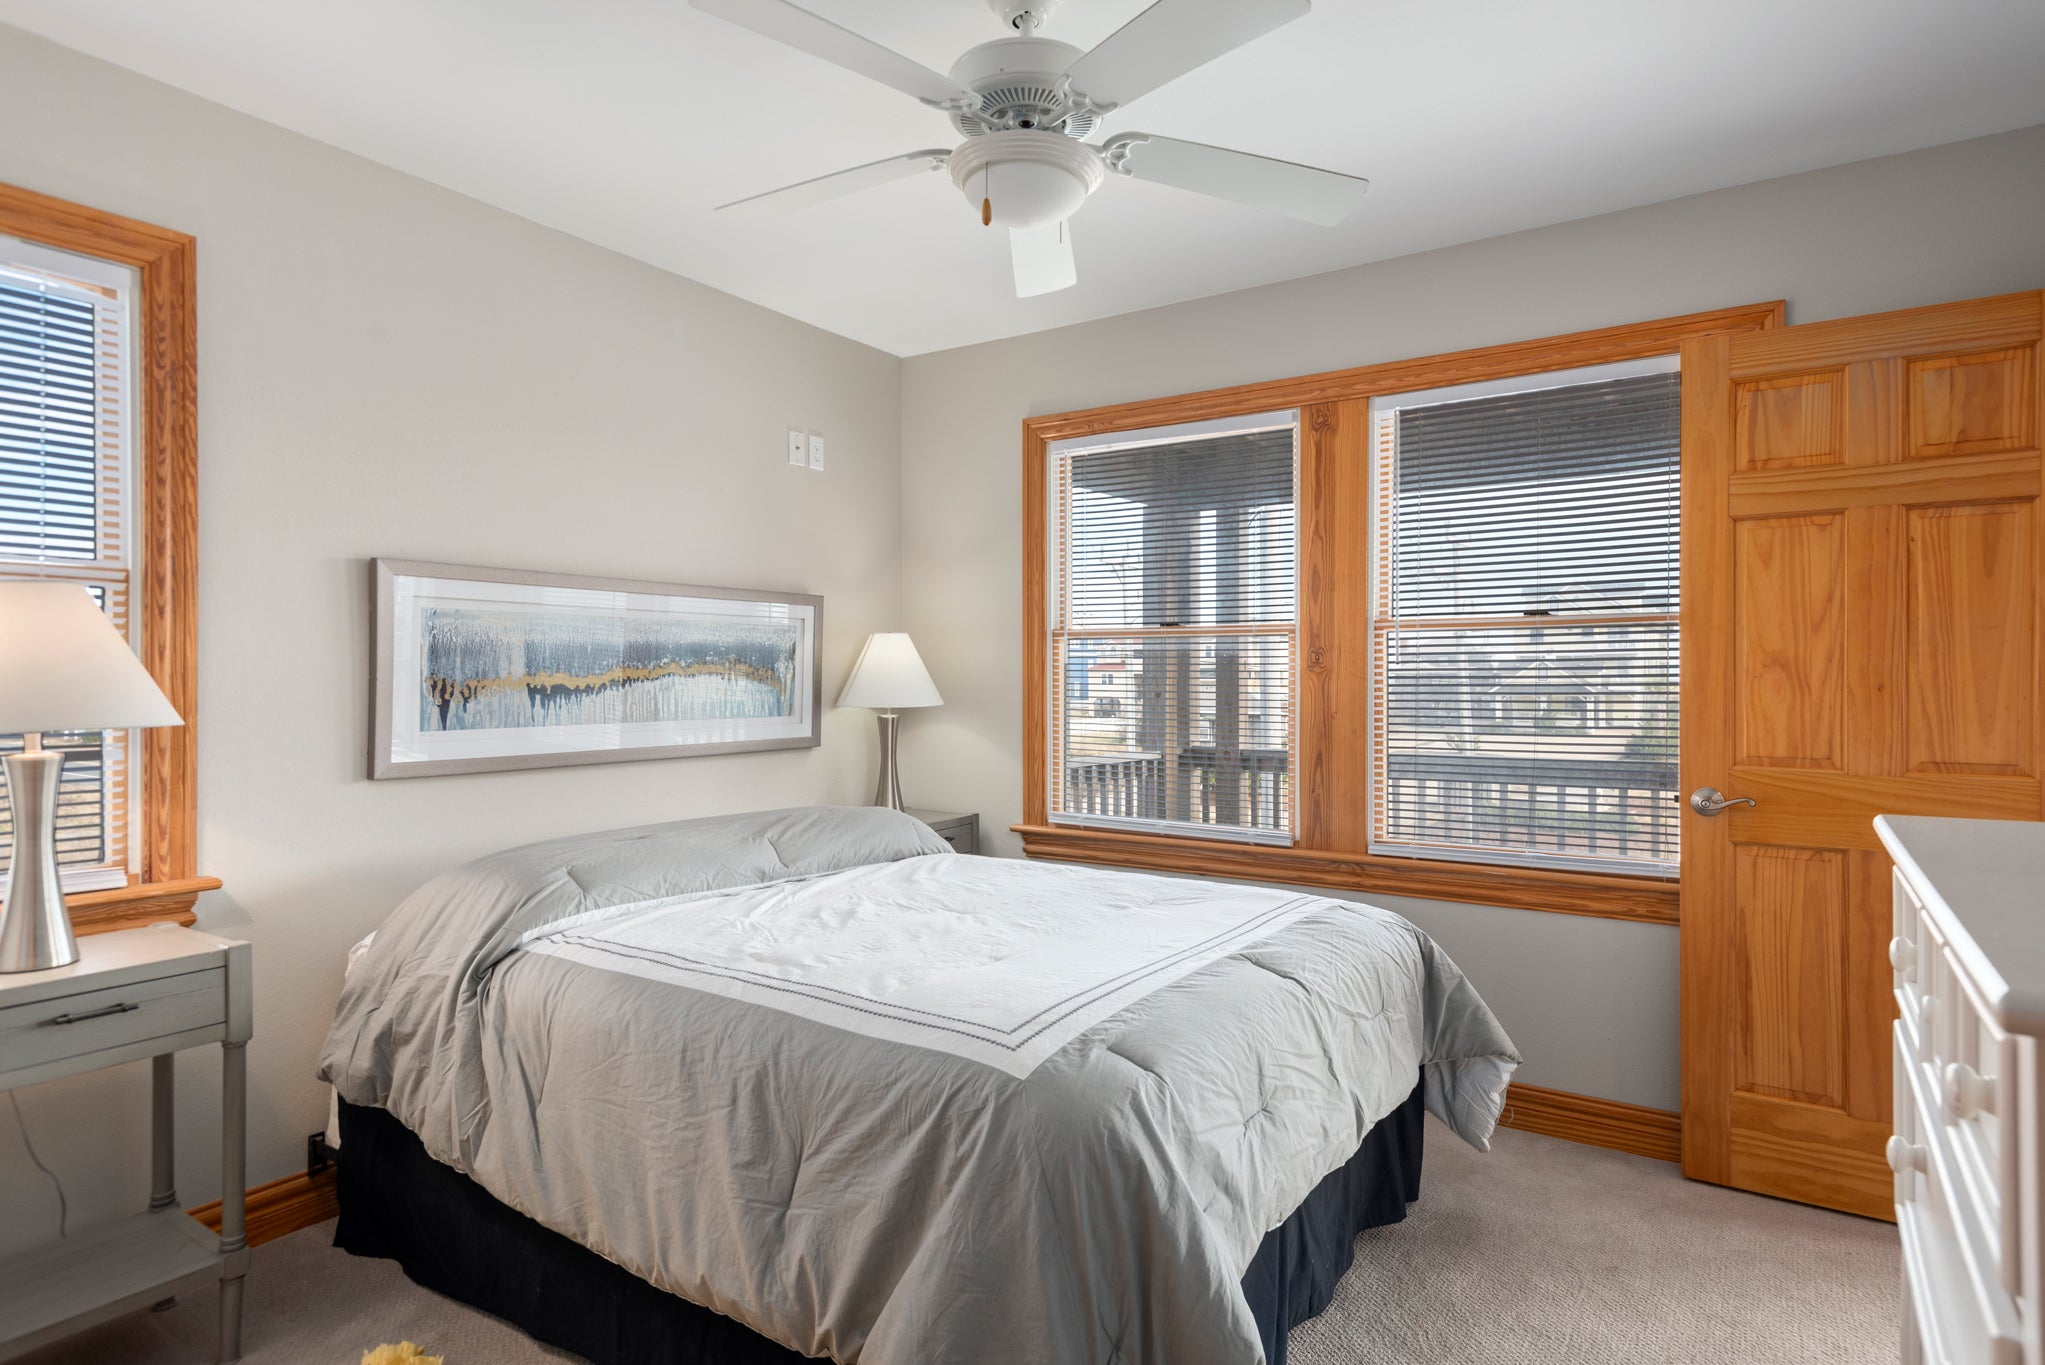 KDN2208: Sea A Chance | Mid Level Bedroom 1